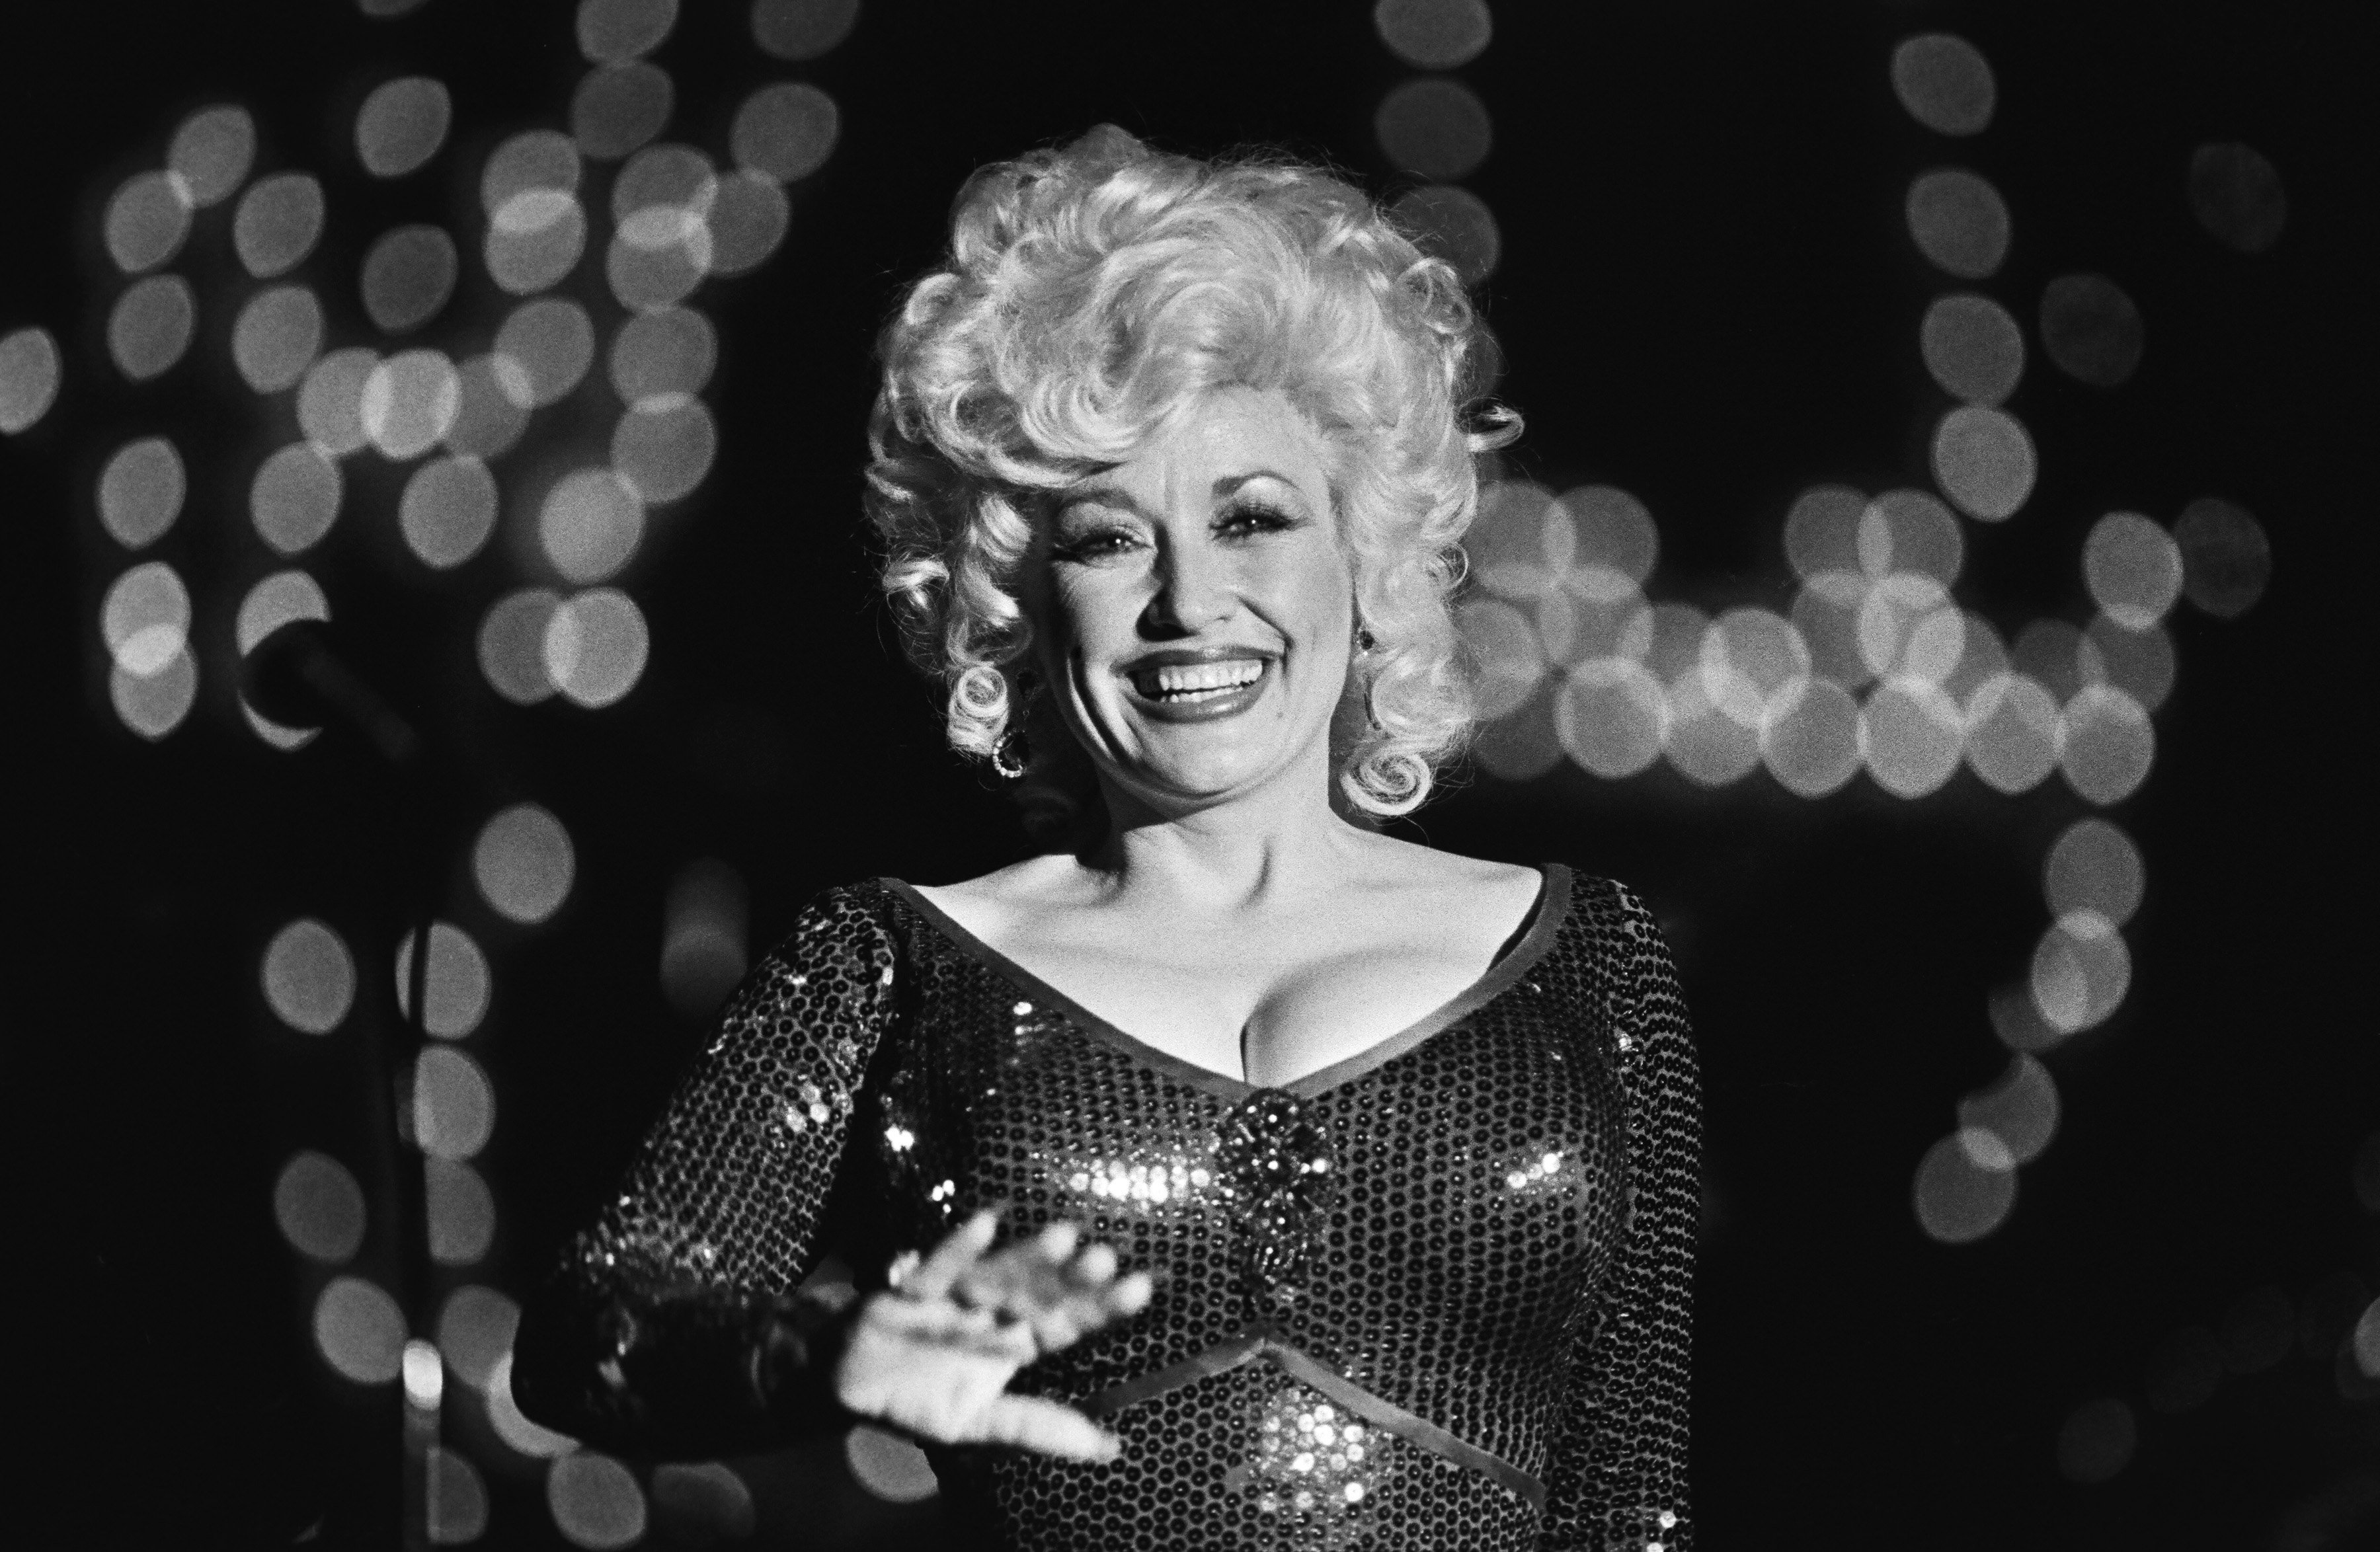 Dolly Parton performs at Harrah's Club in 1980. She's photographed in black and white, waving to the camera.